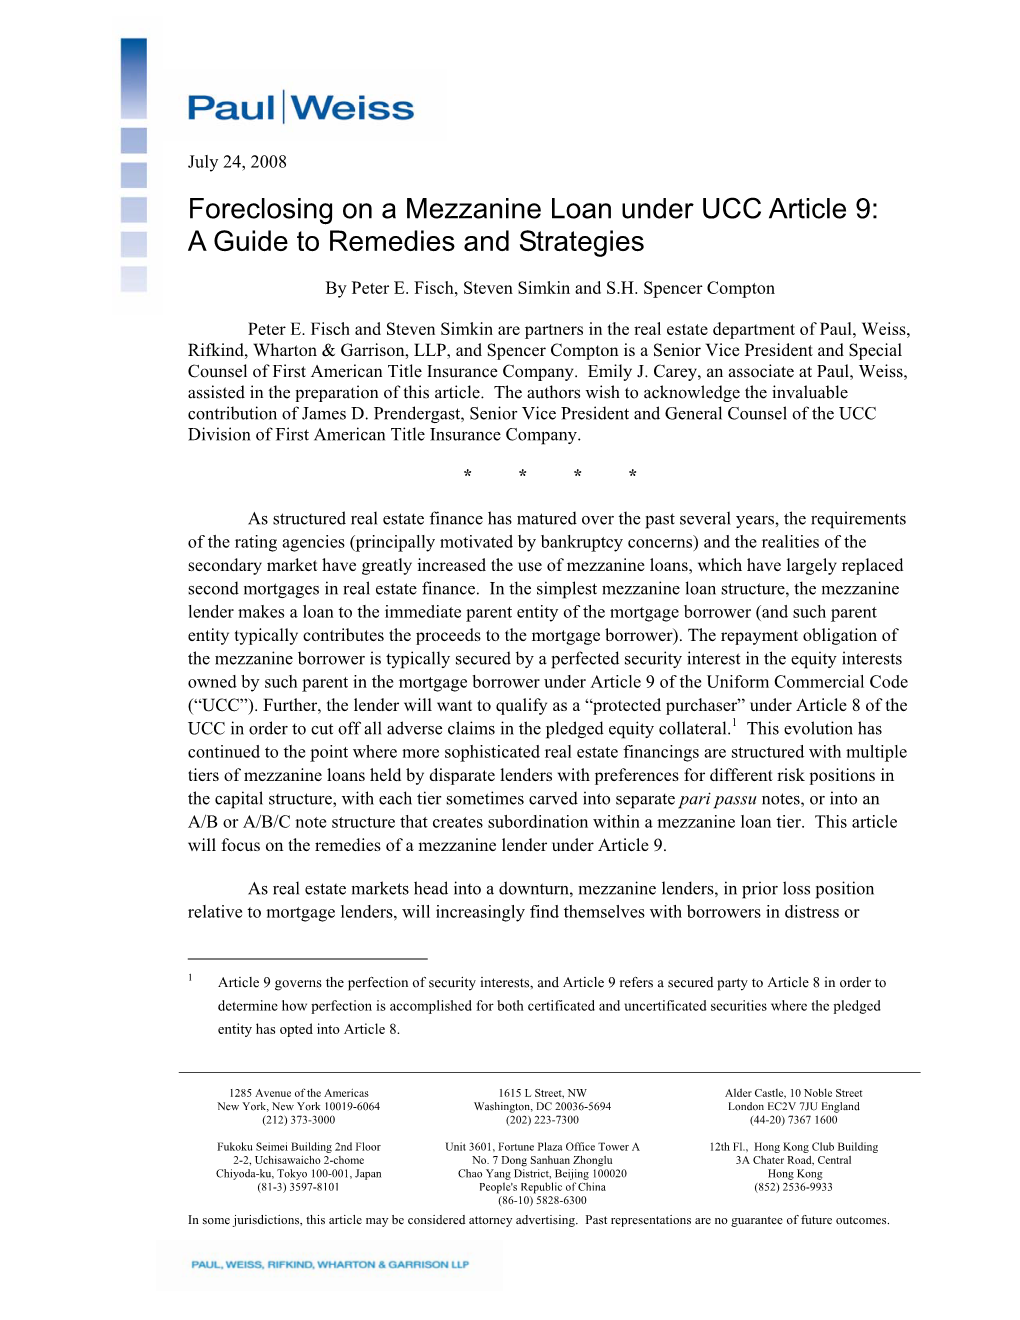 Foreclosing on a Mezzanine Loan Under UCC Article 9: a Guide to Remedies and Strategies